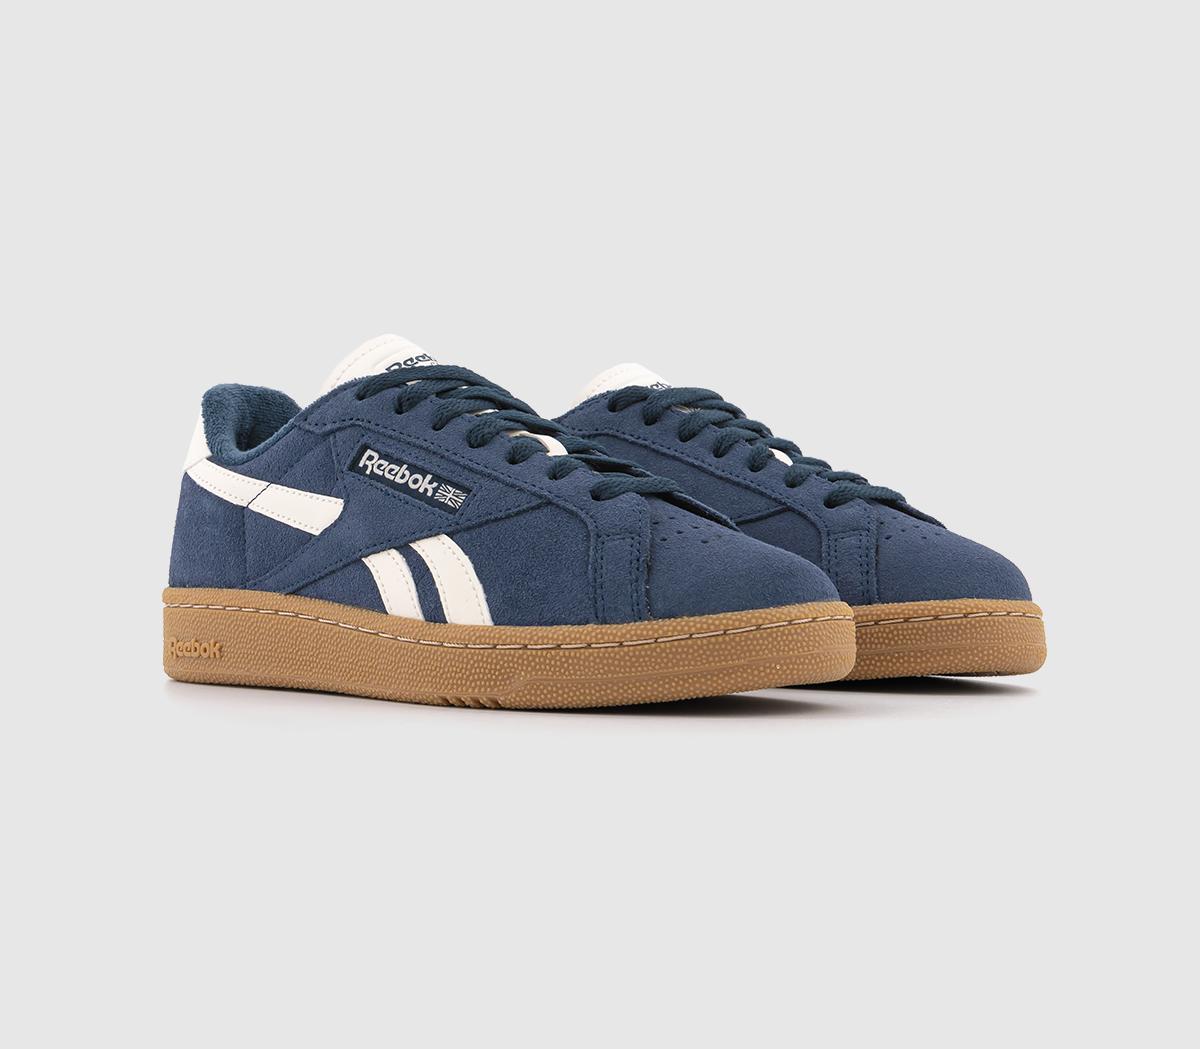 Reebok Womens Club C Grounds Trainers Vector Navy Blue, 5.5